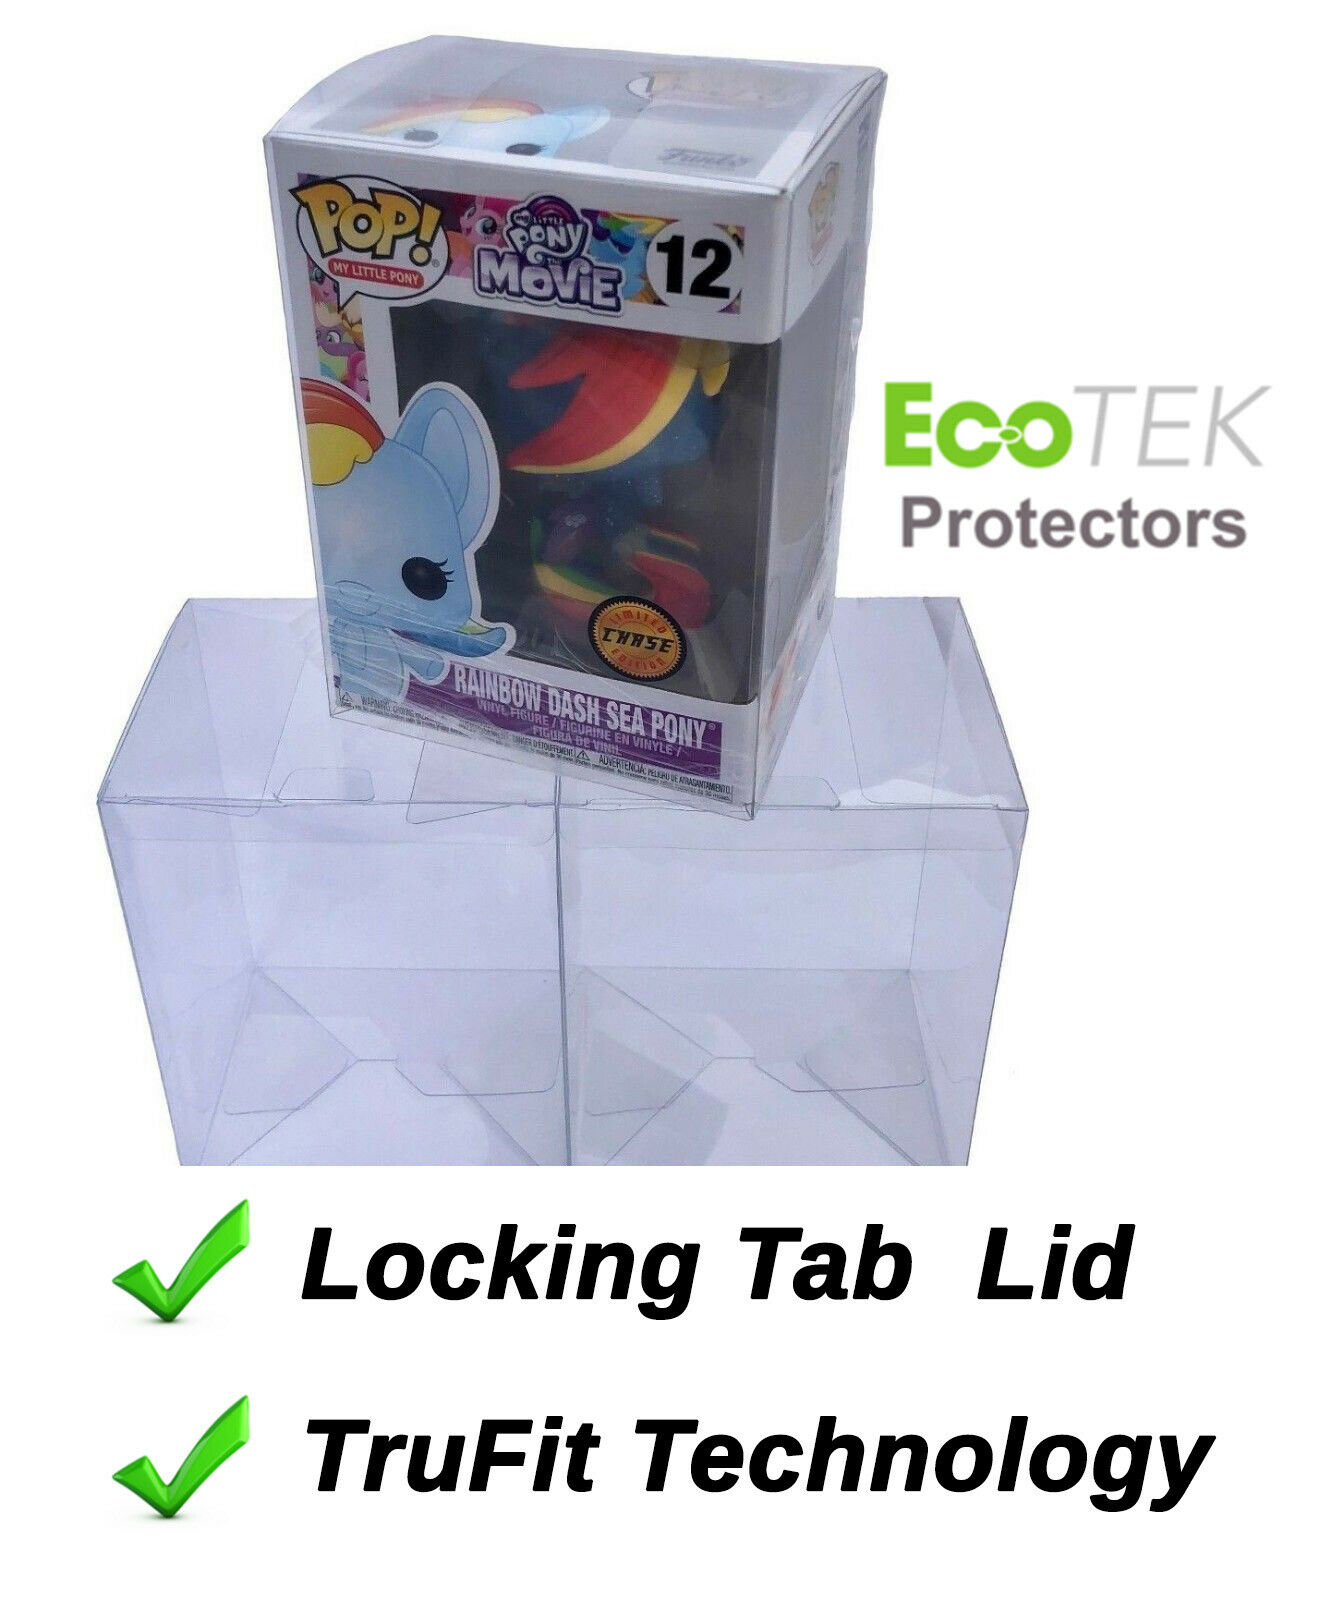 Lot 5 20 50 100 Collectibles Funko Pop Protector Case For 4" Inch Vinyl Figures